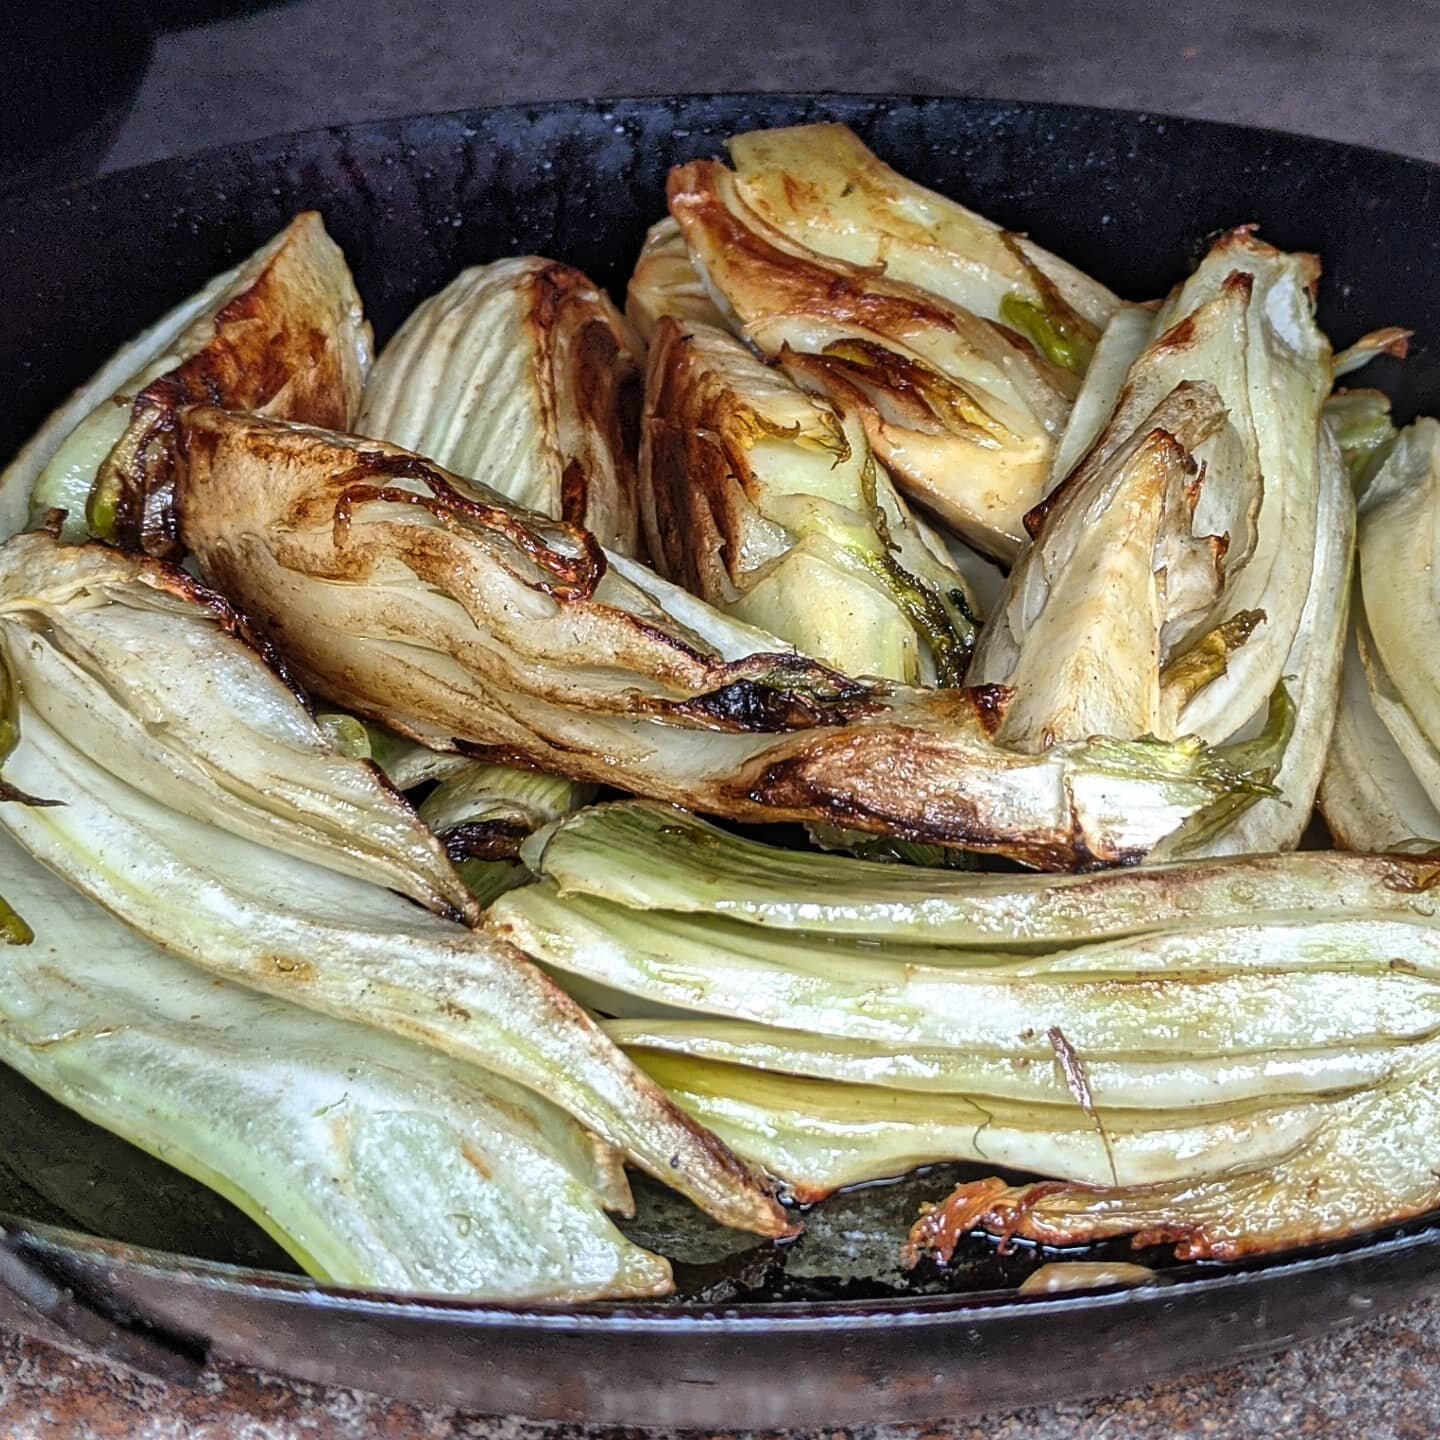 Roast Fennel on the veggie platter.  What do you think?